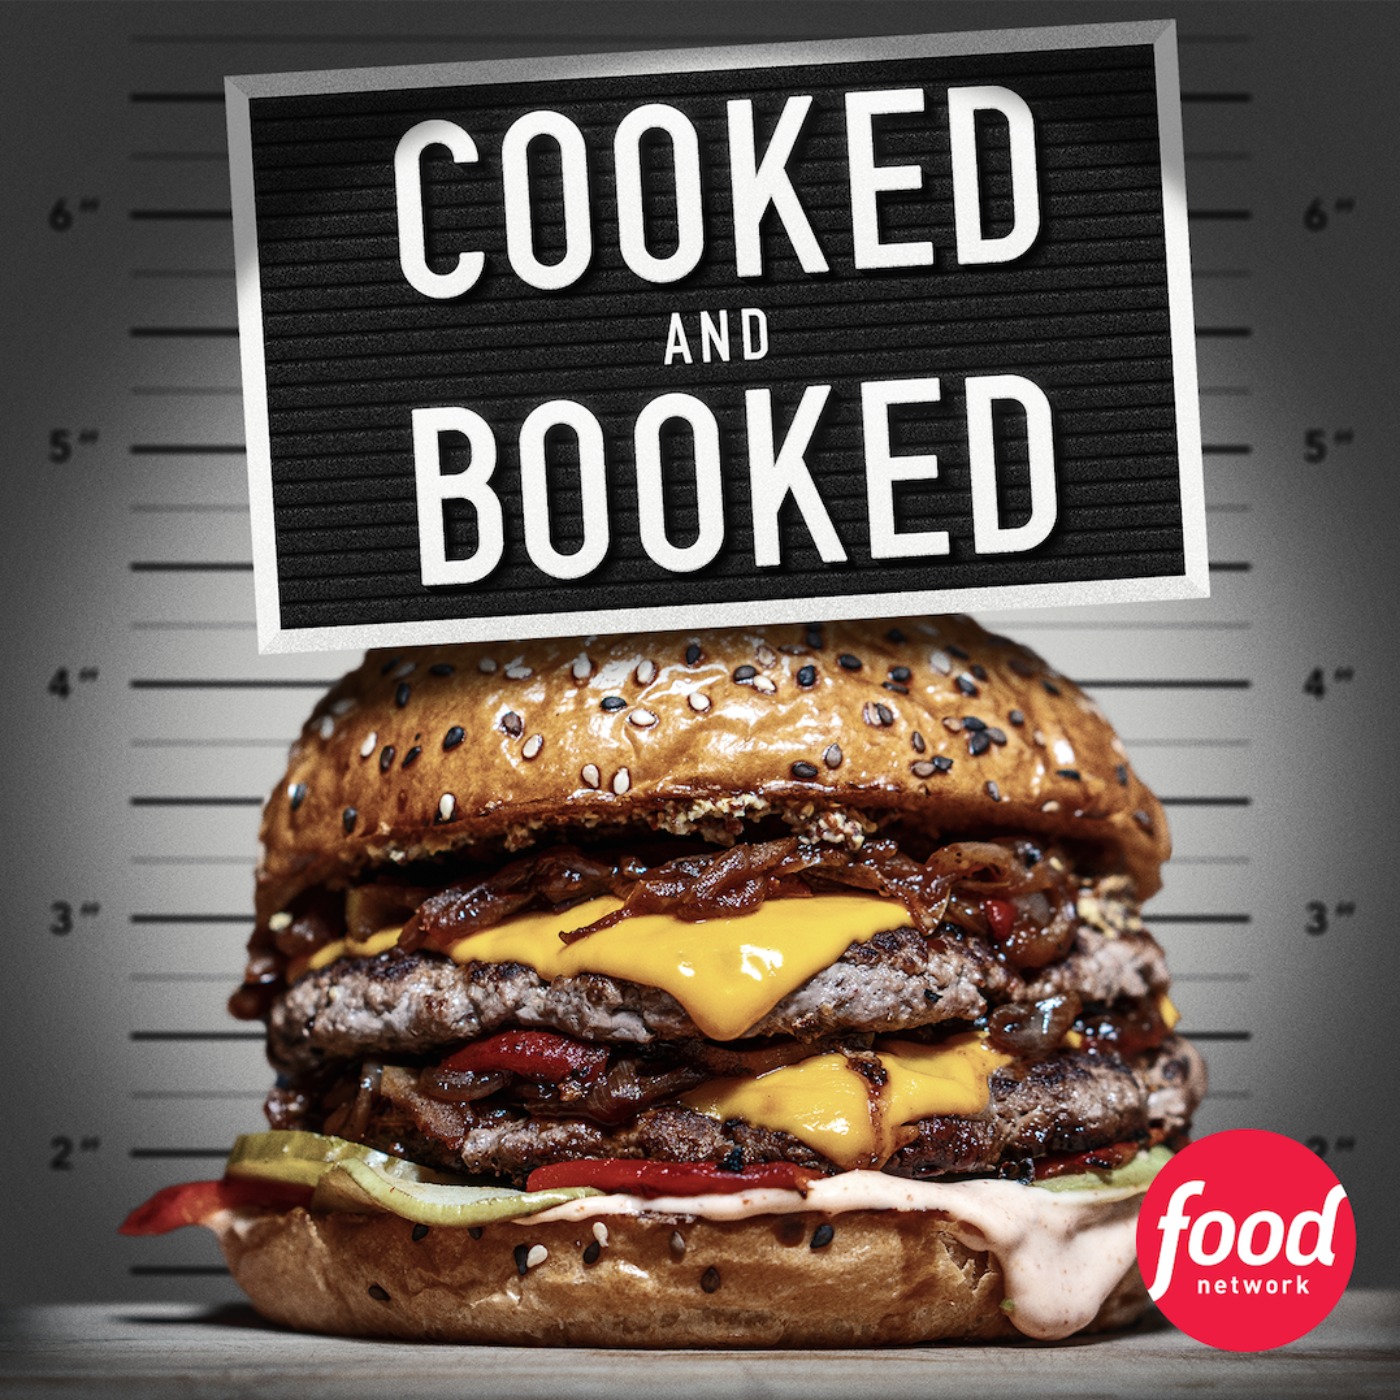 Introducing: Cooked and Booked